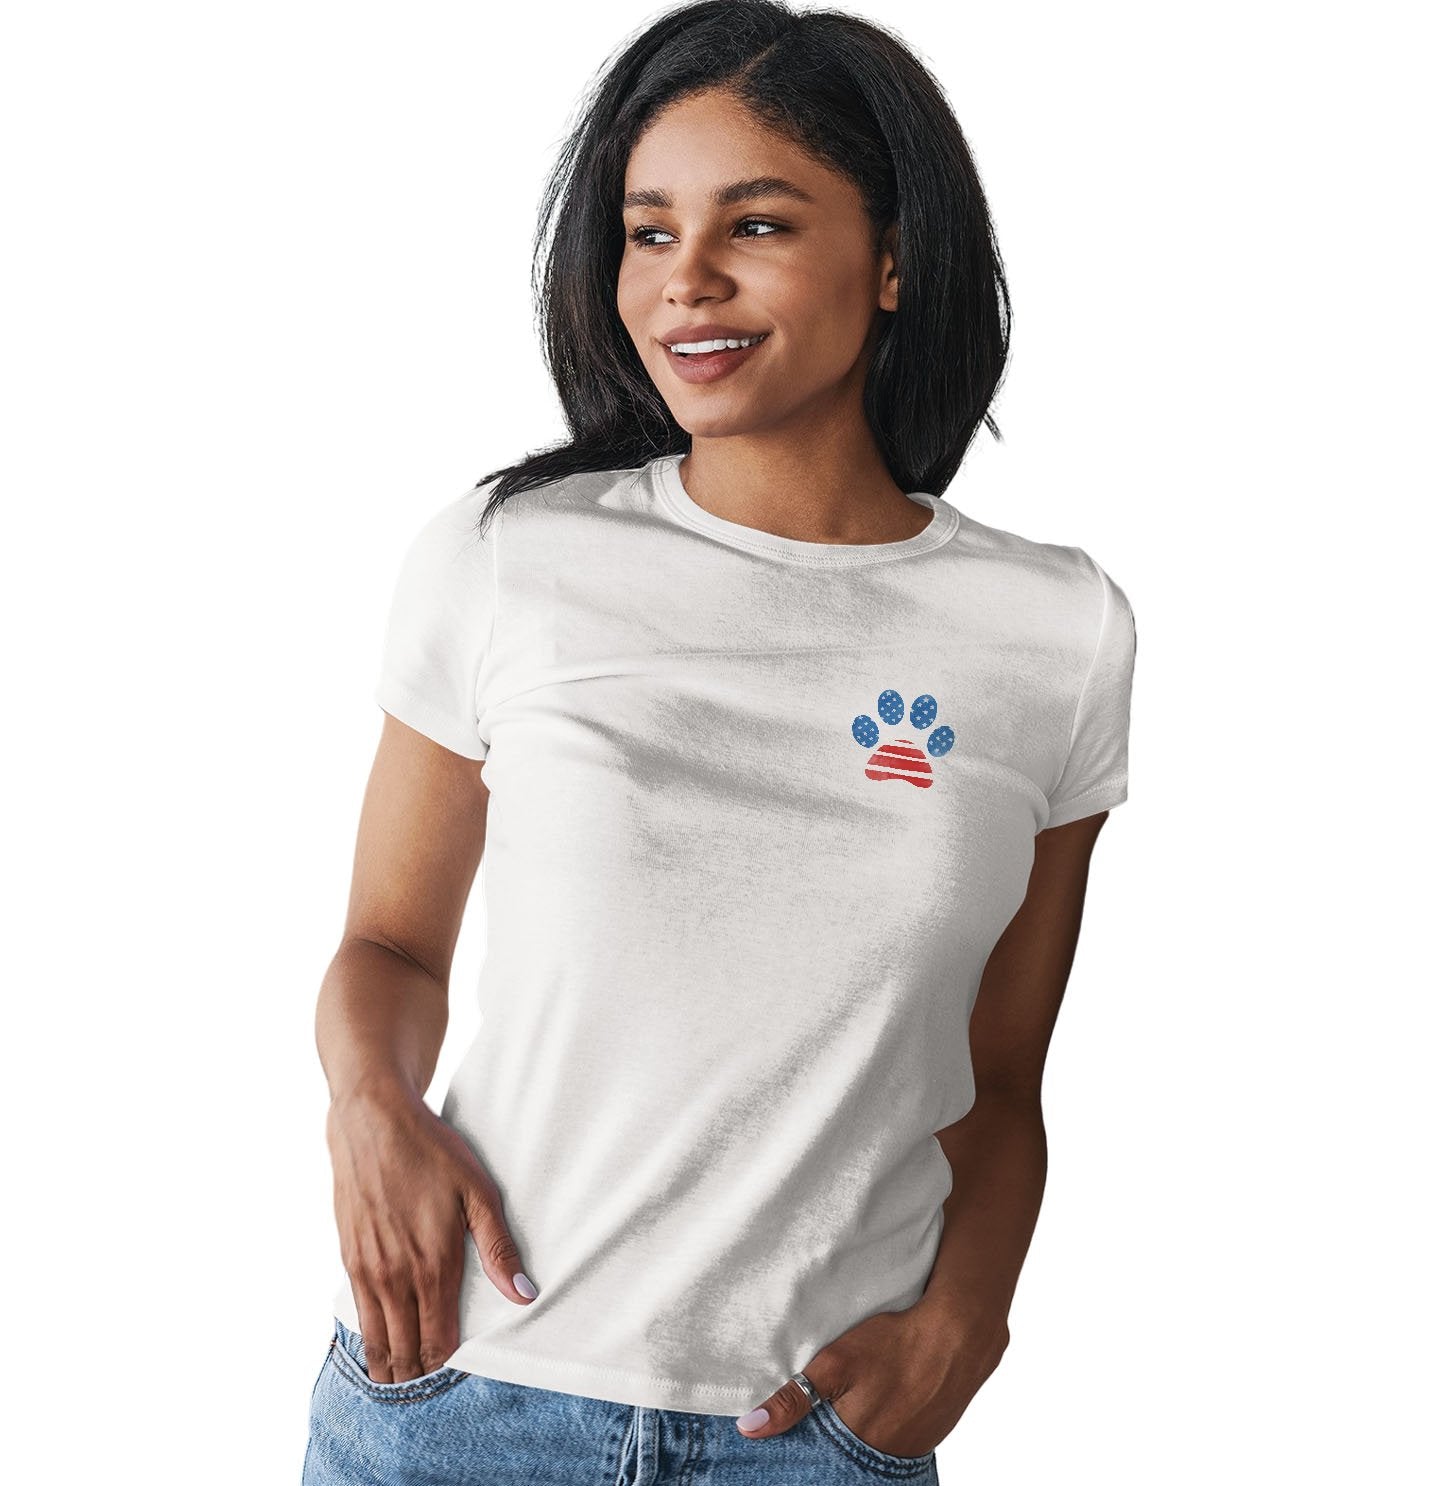 Pawtriotic Pawprint - Women's Fitted T-Shirt